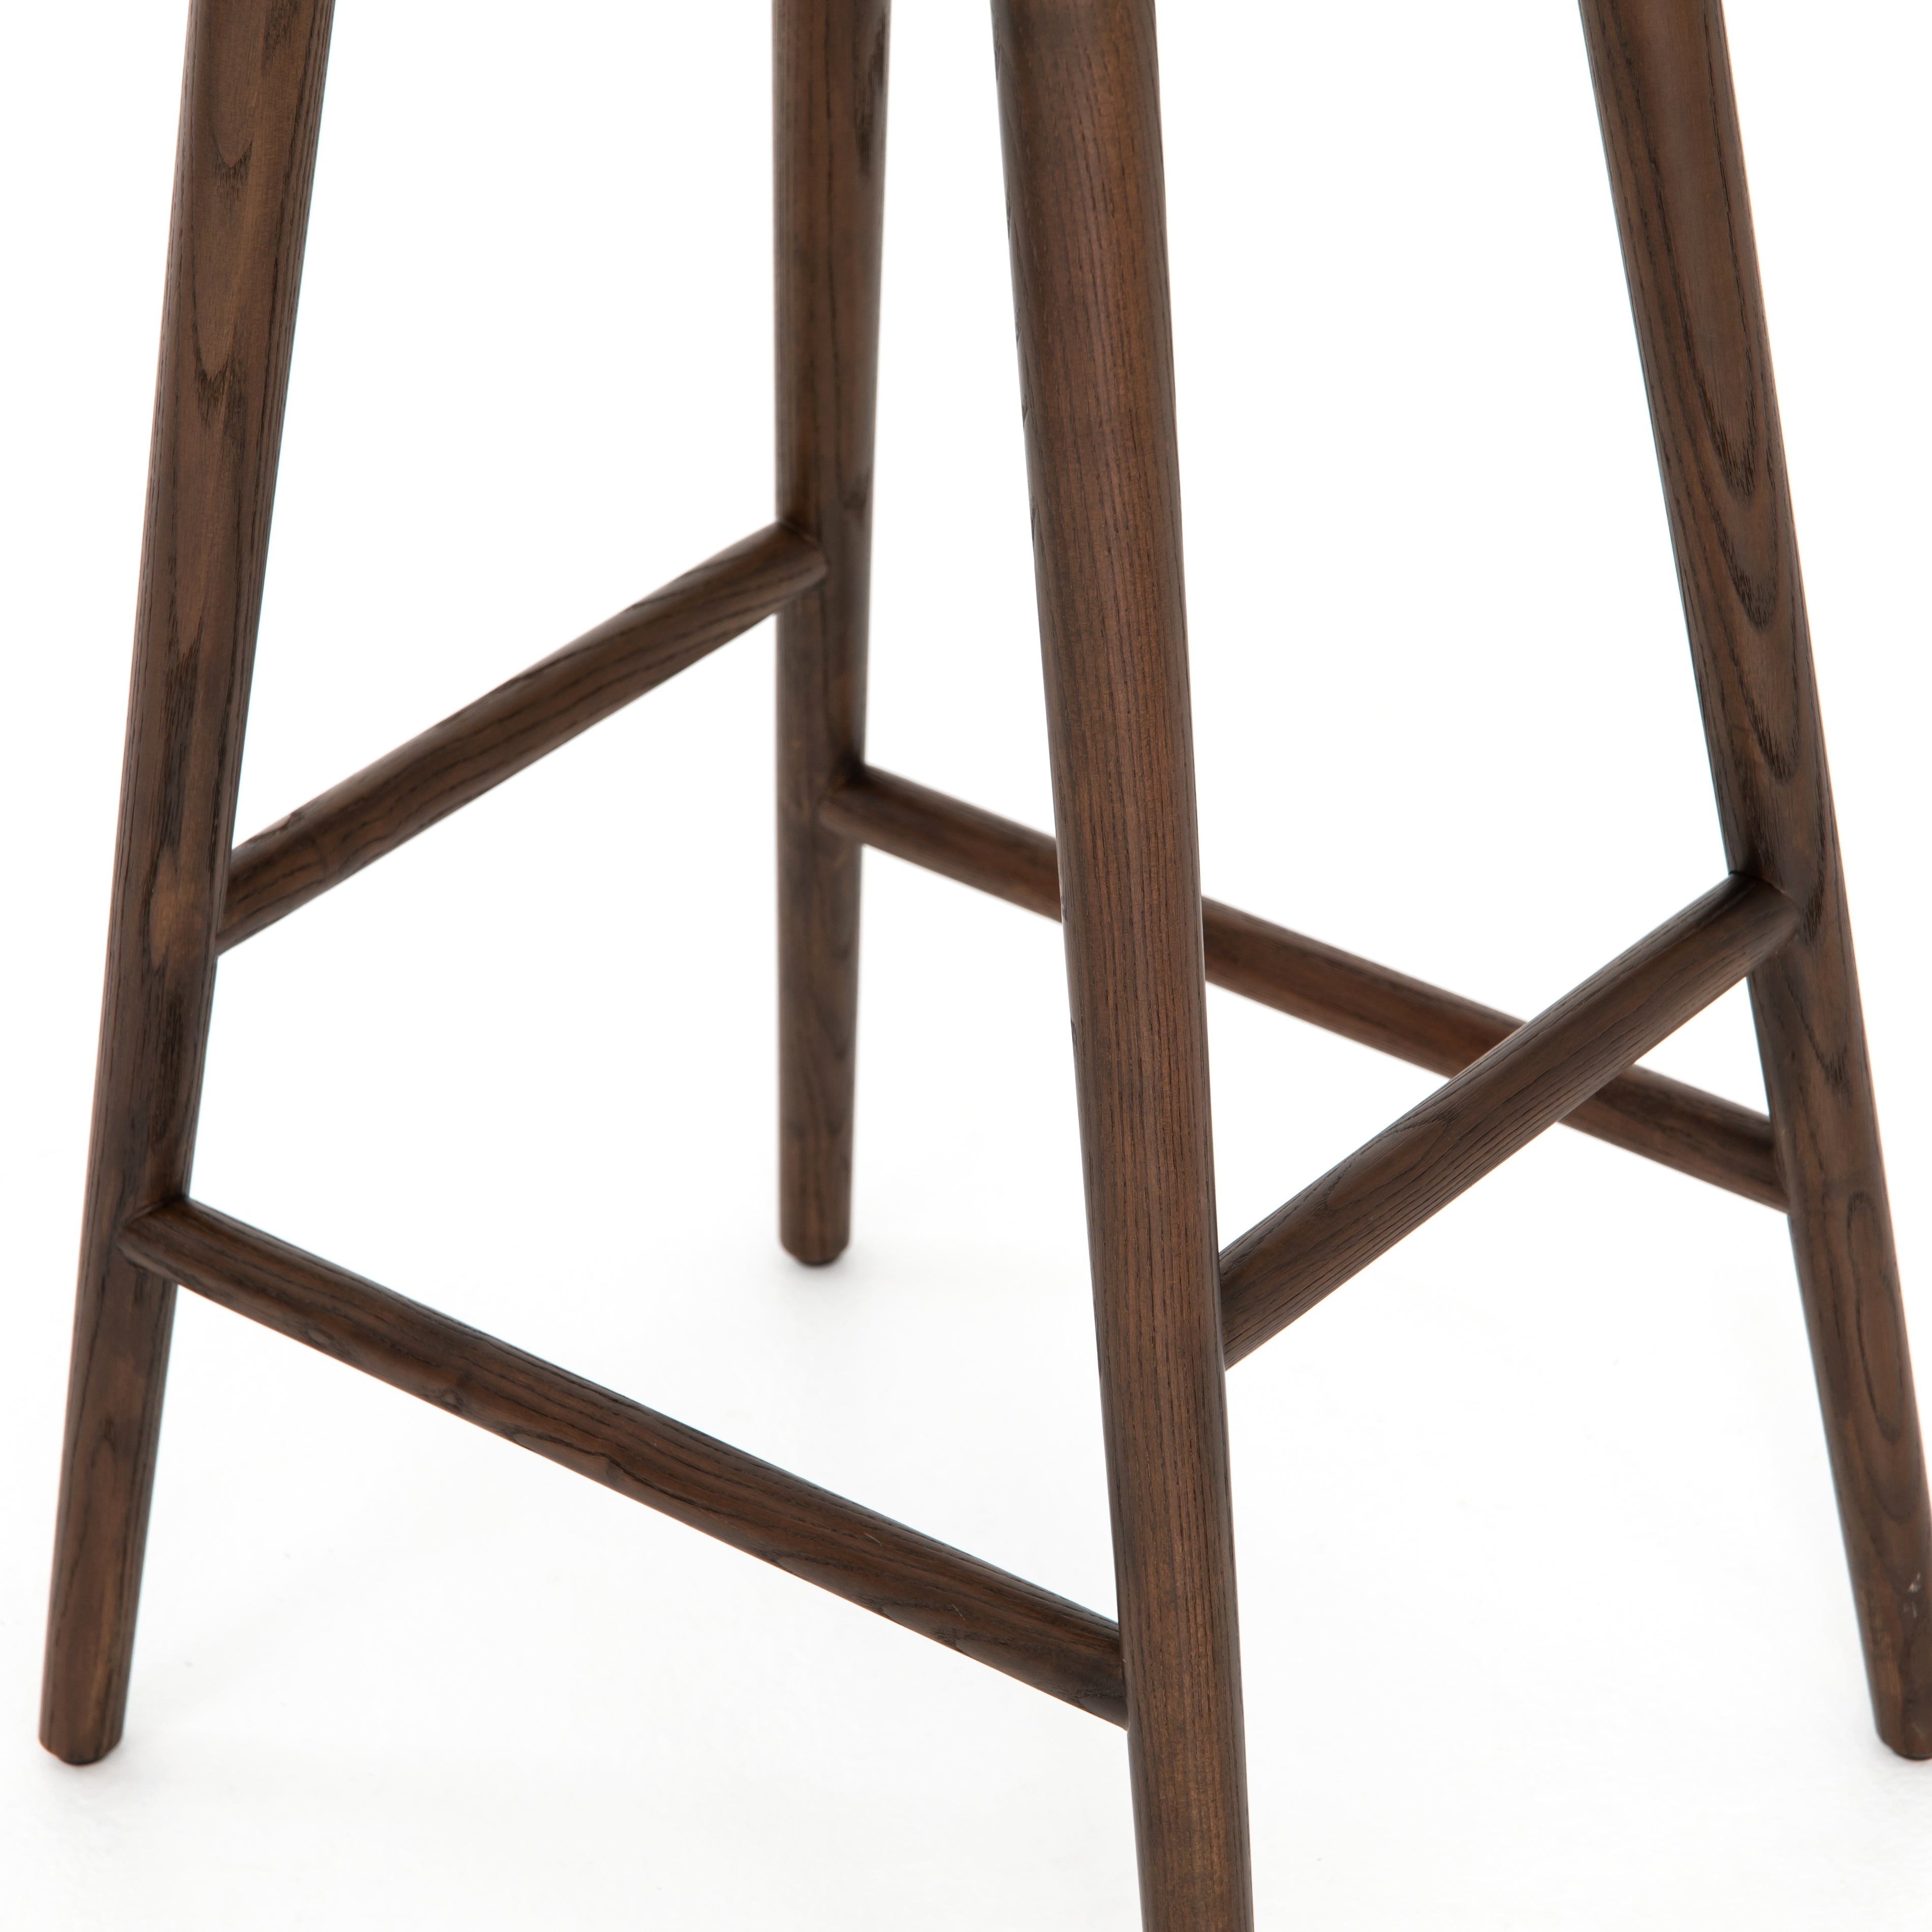 Distressed Black Faux Leather with Warm Parawood (Bar Height) | Union Bar/Counter Stool | Valley Ridge Furniture